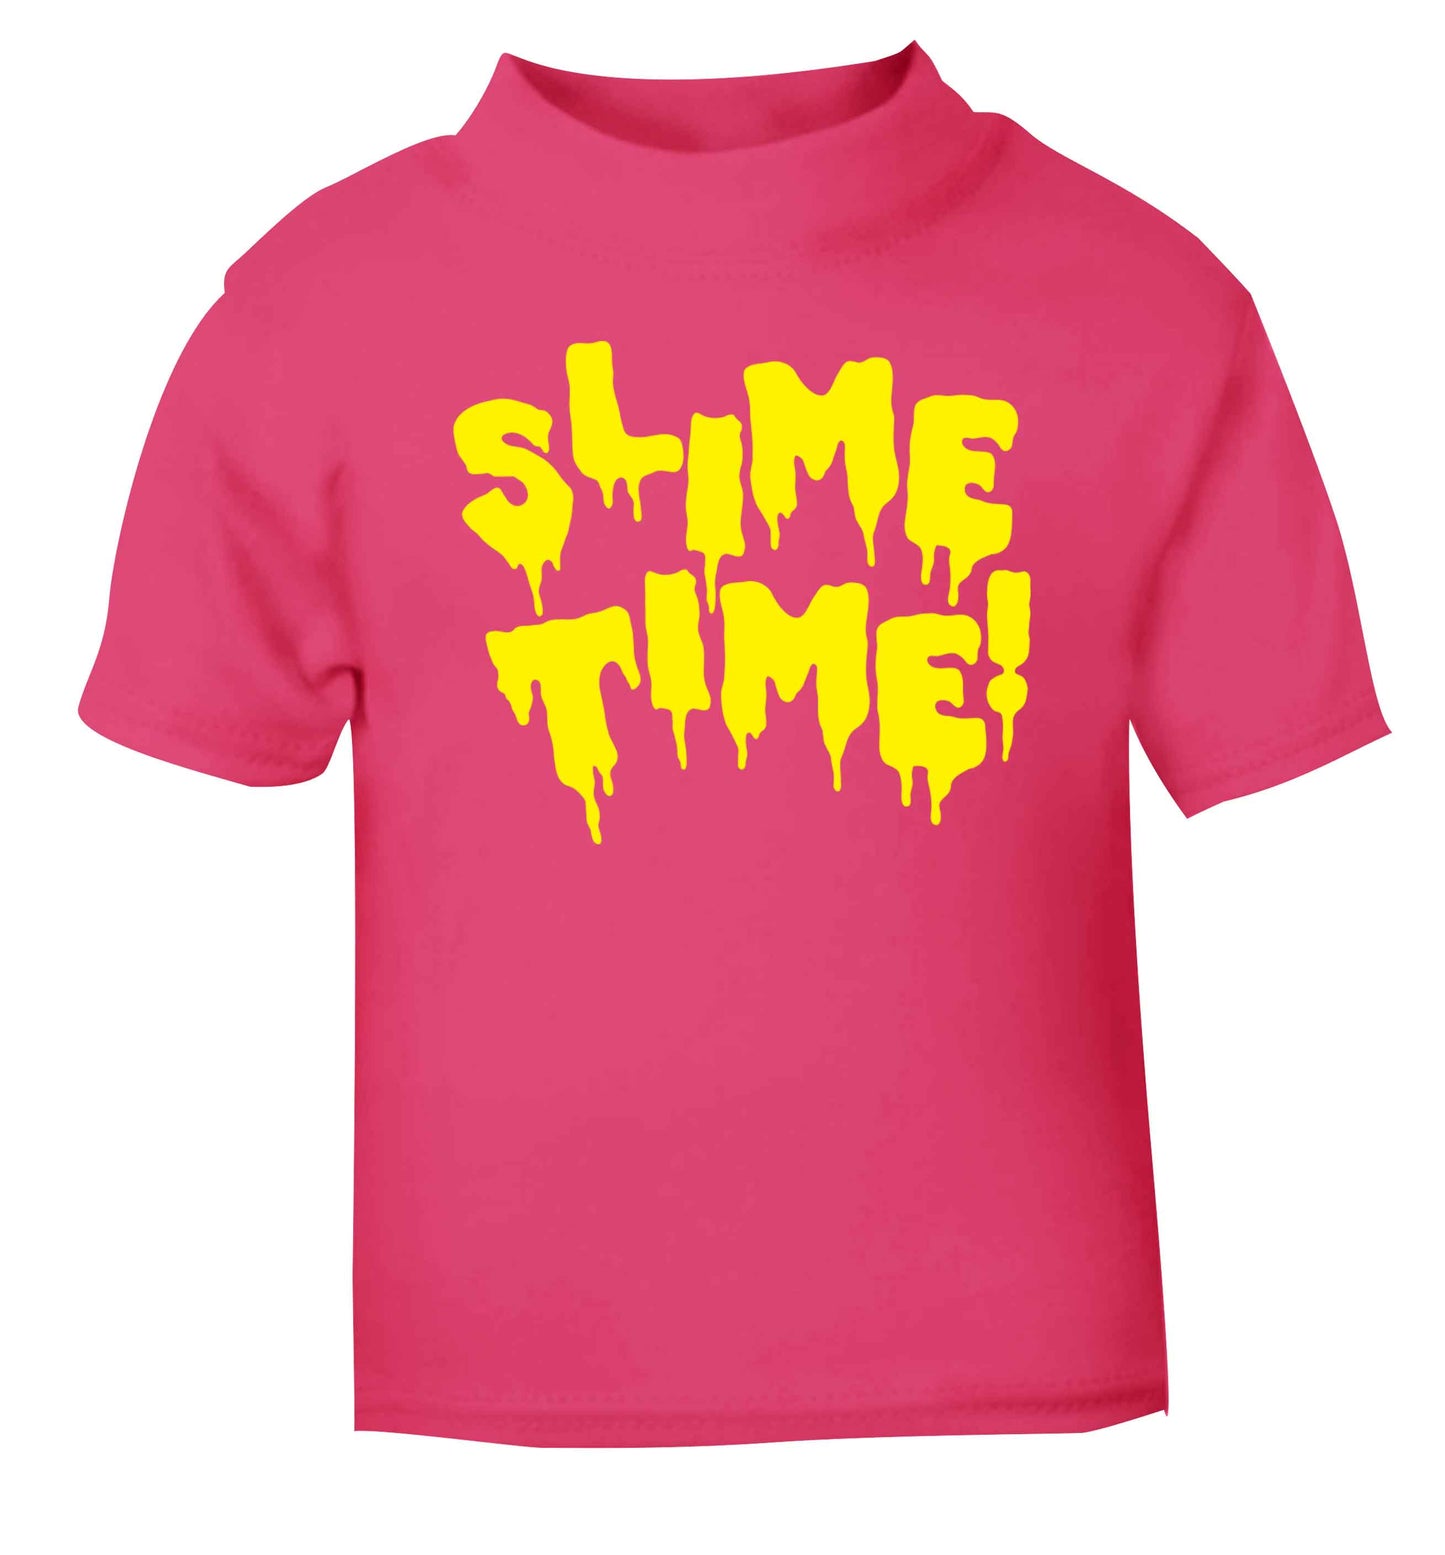 Neon yellow slime time pink baby toddler Tshirt 2 Years